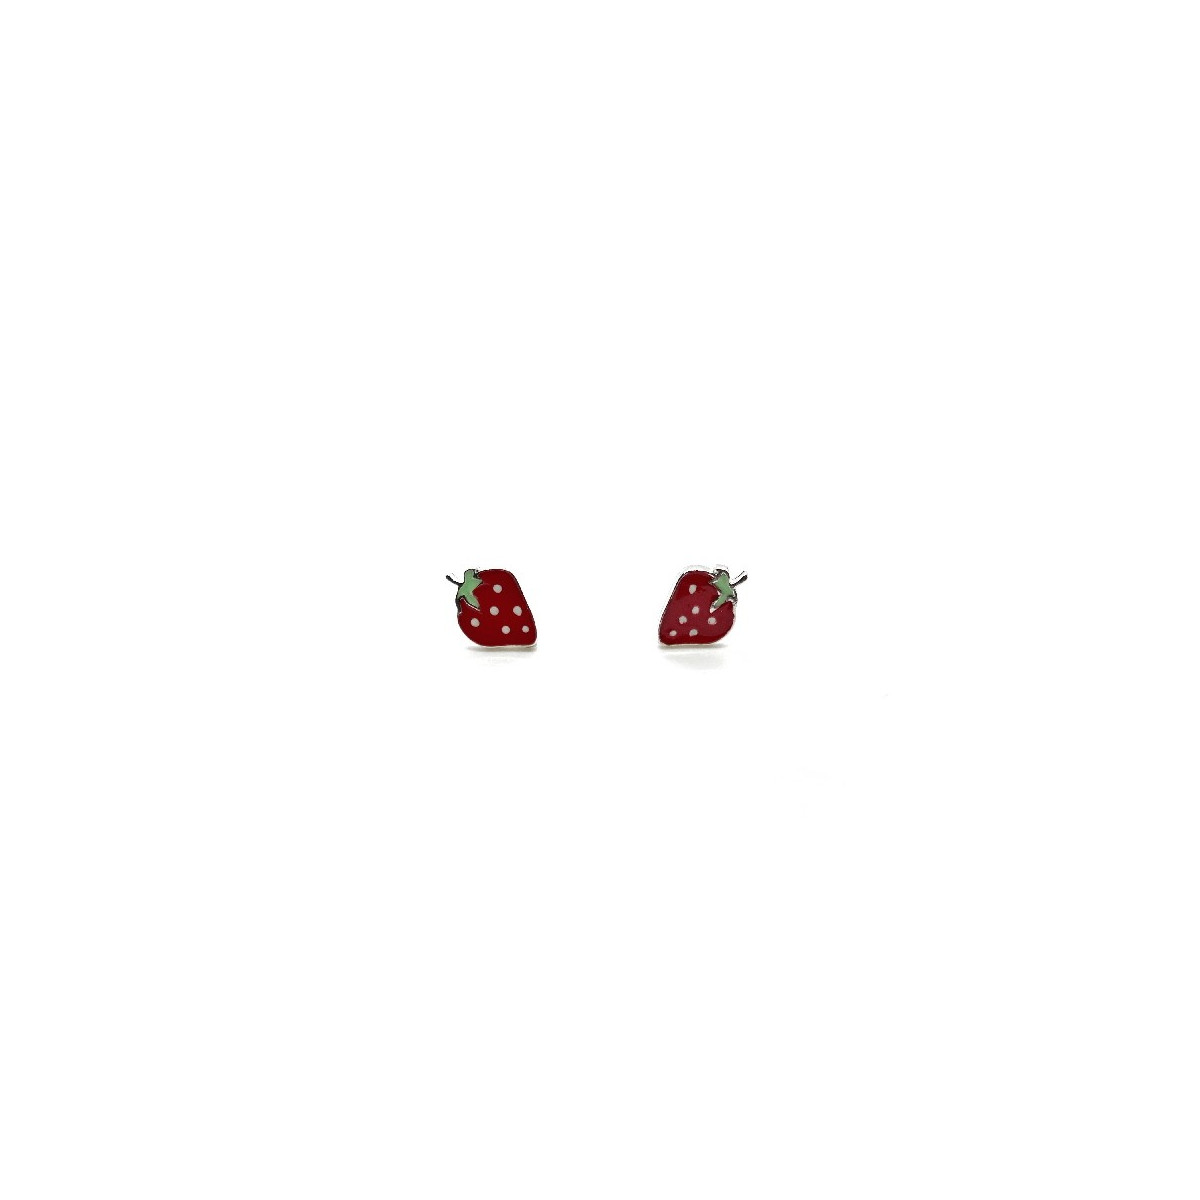 STRAWBERRY LINEARGENT EARRINGS - 17680-A